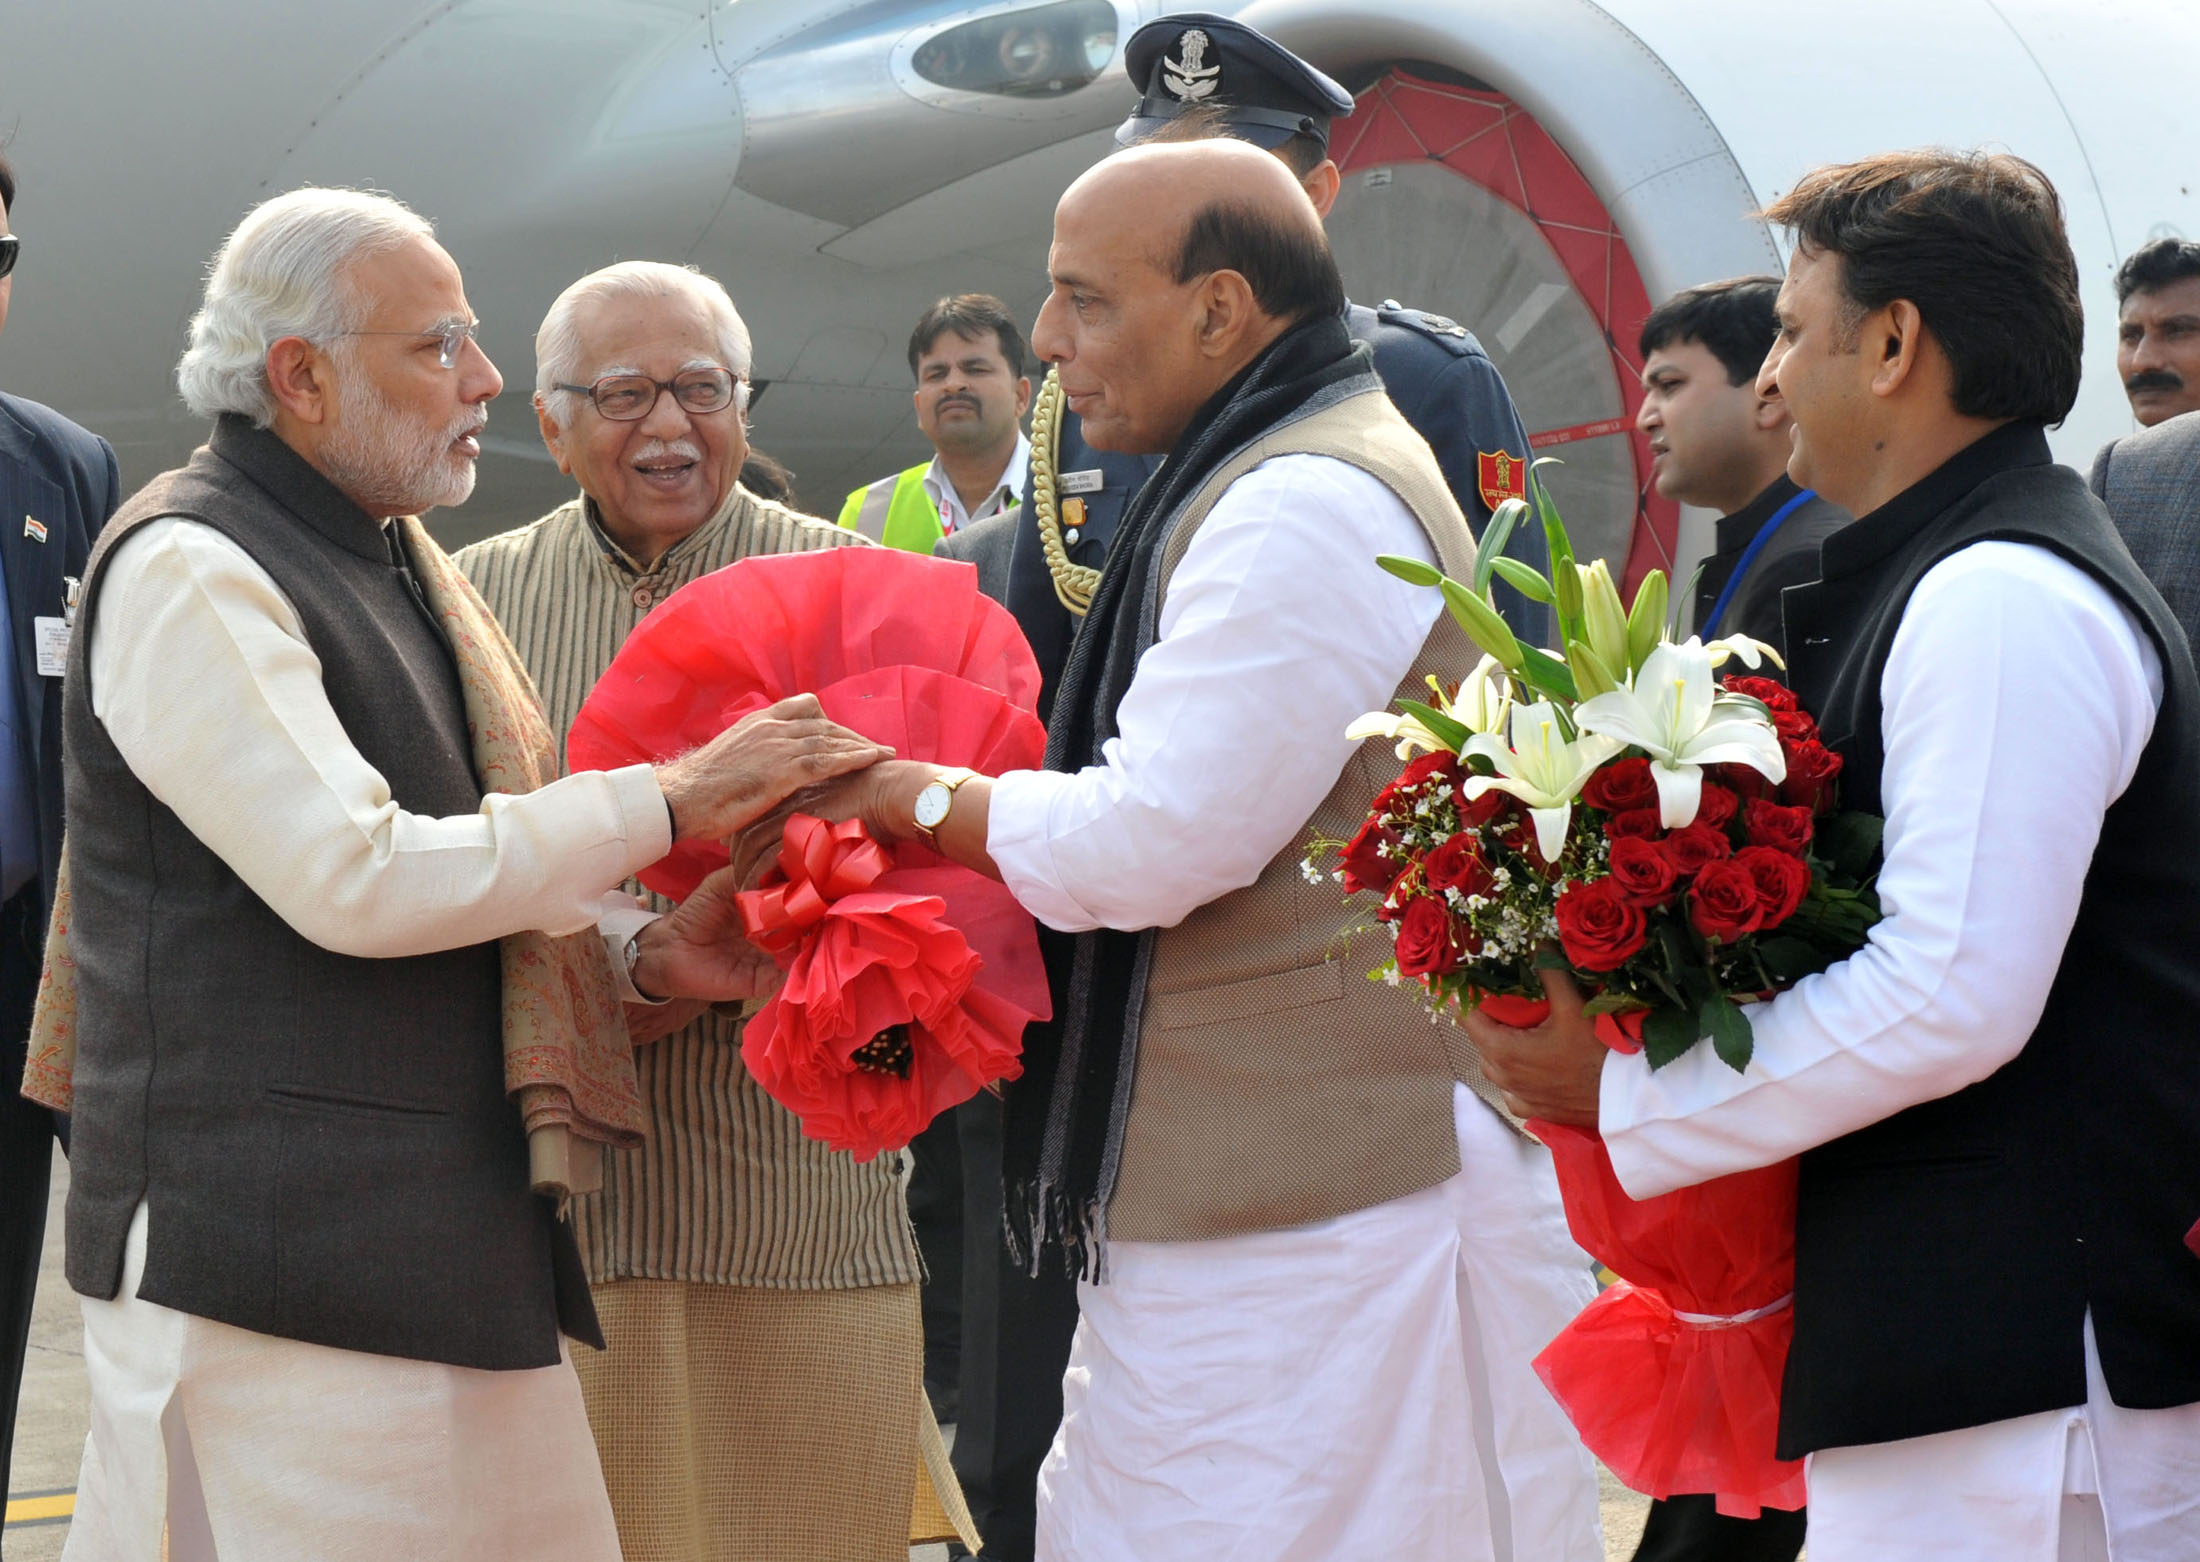 The Prime Minister, Shri Narendra Modi being welcomed by the Union Home Minister, Shri Rajnath Singh on his arrival, at Lucknow airport, in Uttar Pradesh on January 22, 2016. 	The Governor of Uttar Pradesh, Shri Ram Naik and the Chief Minister of Uttar Pradesh, Shri Akhilesh Yadav are also seen.